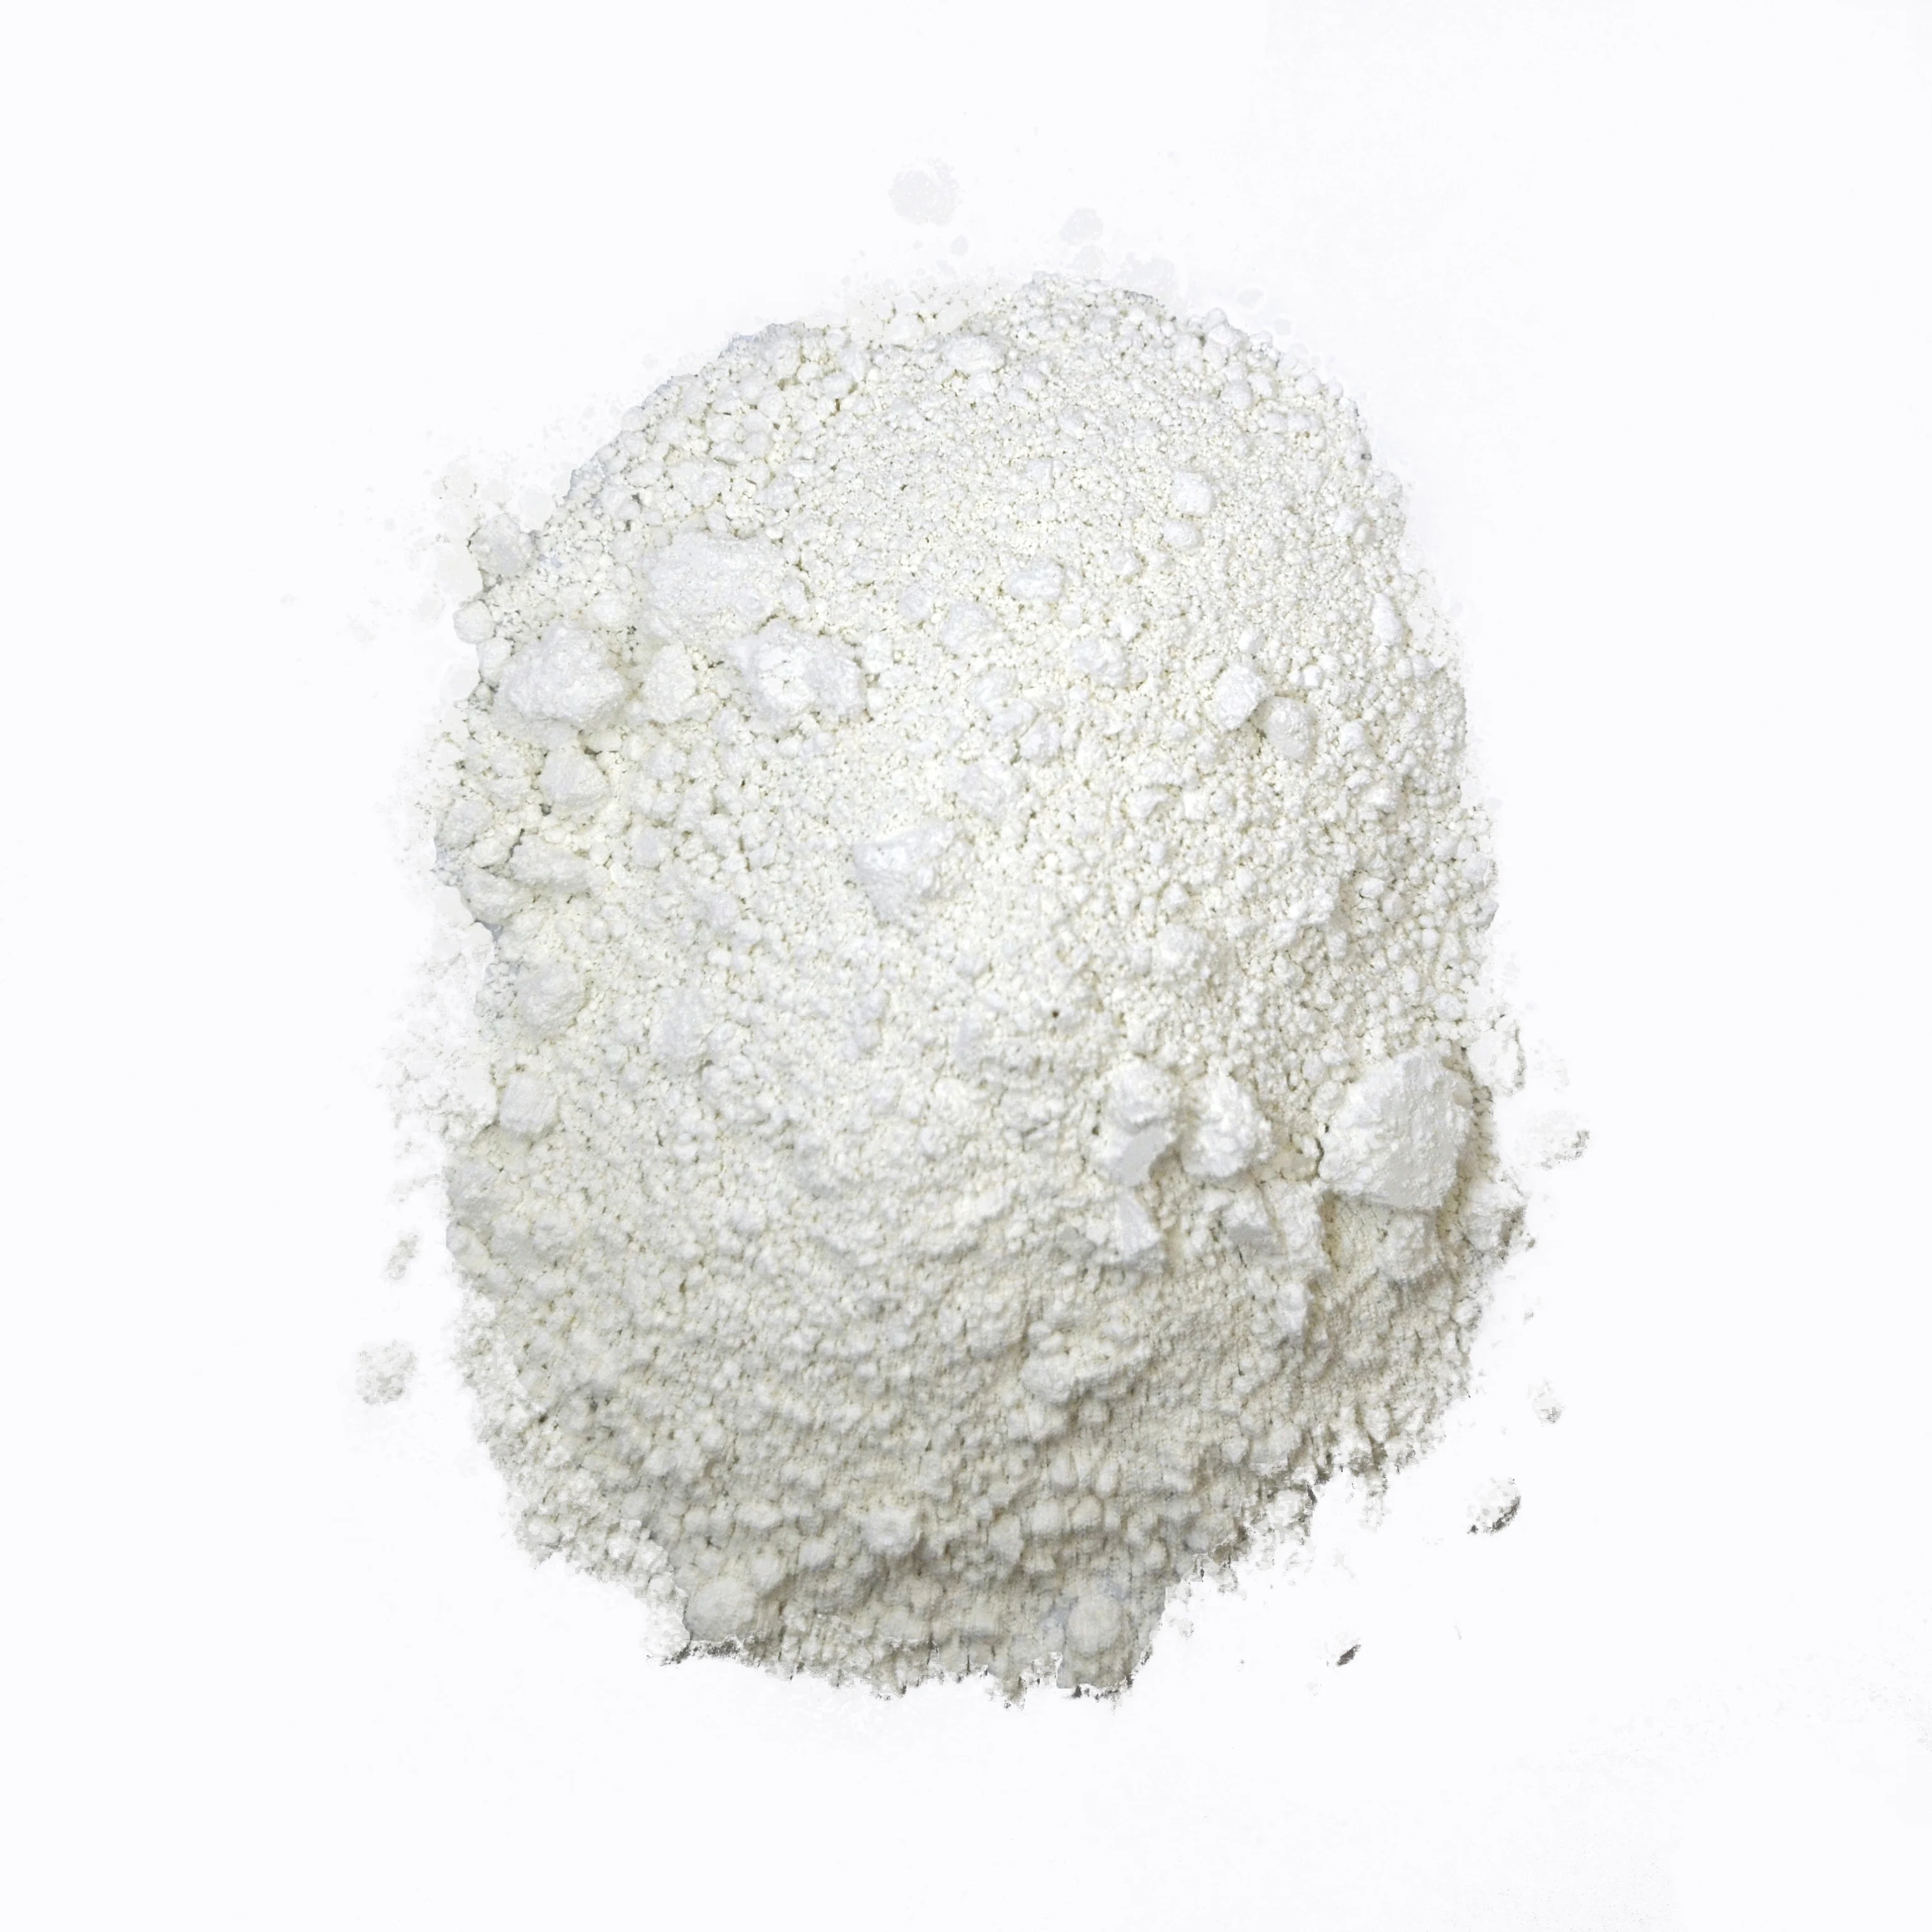 china supply calcined ceramic raw material kaolin clay cheaps price for ruber paint coatings ceramics paper